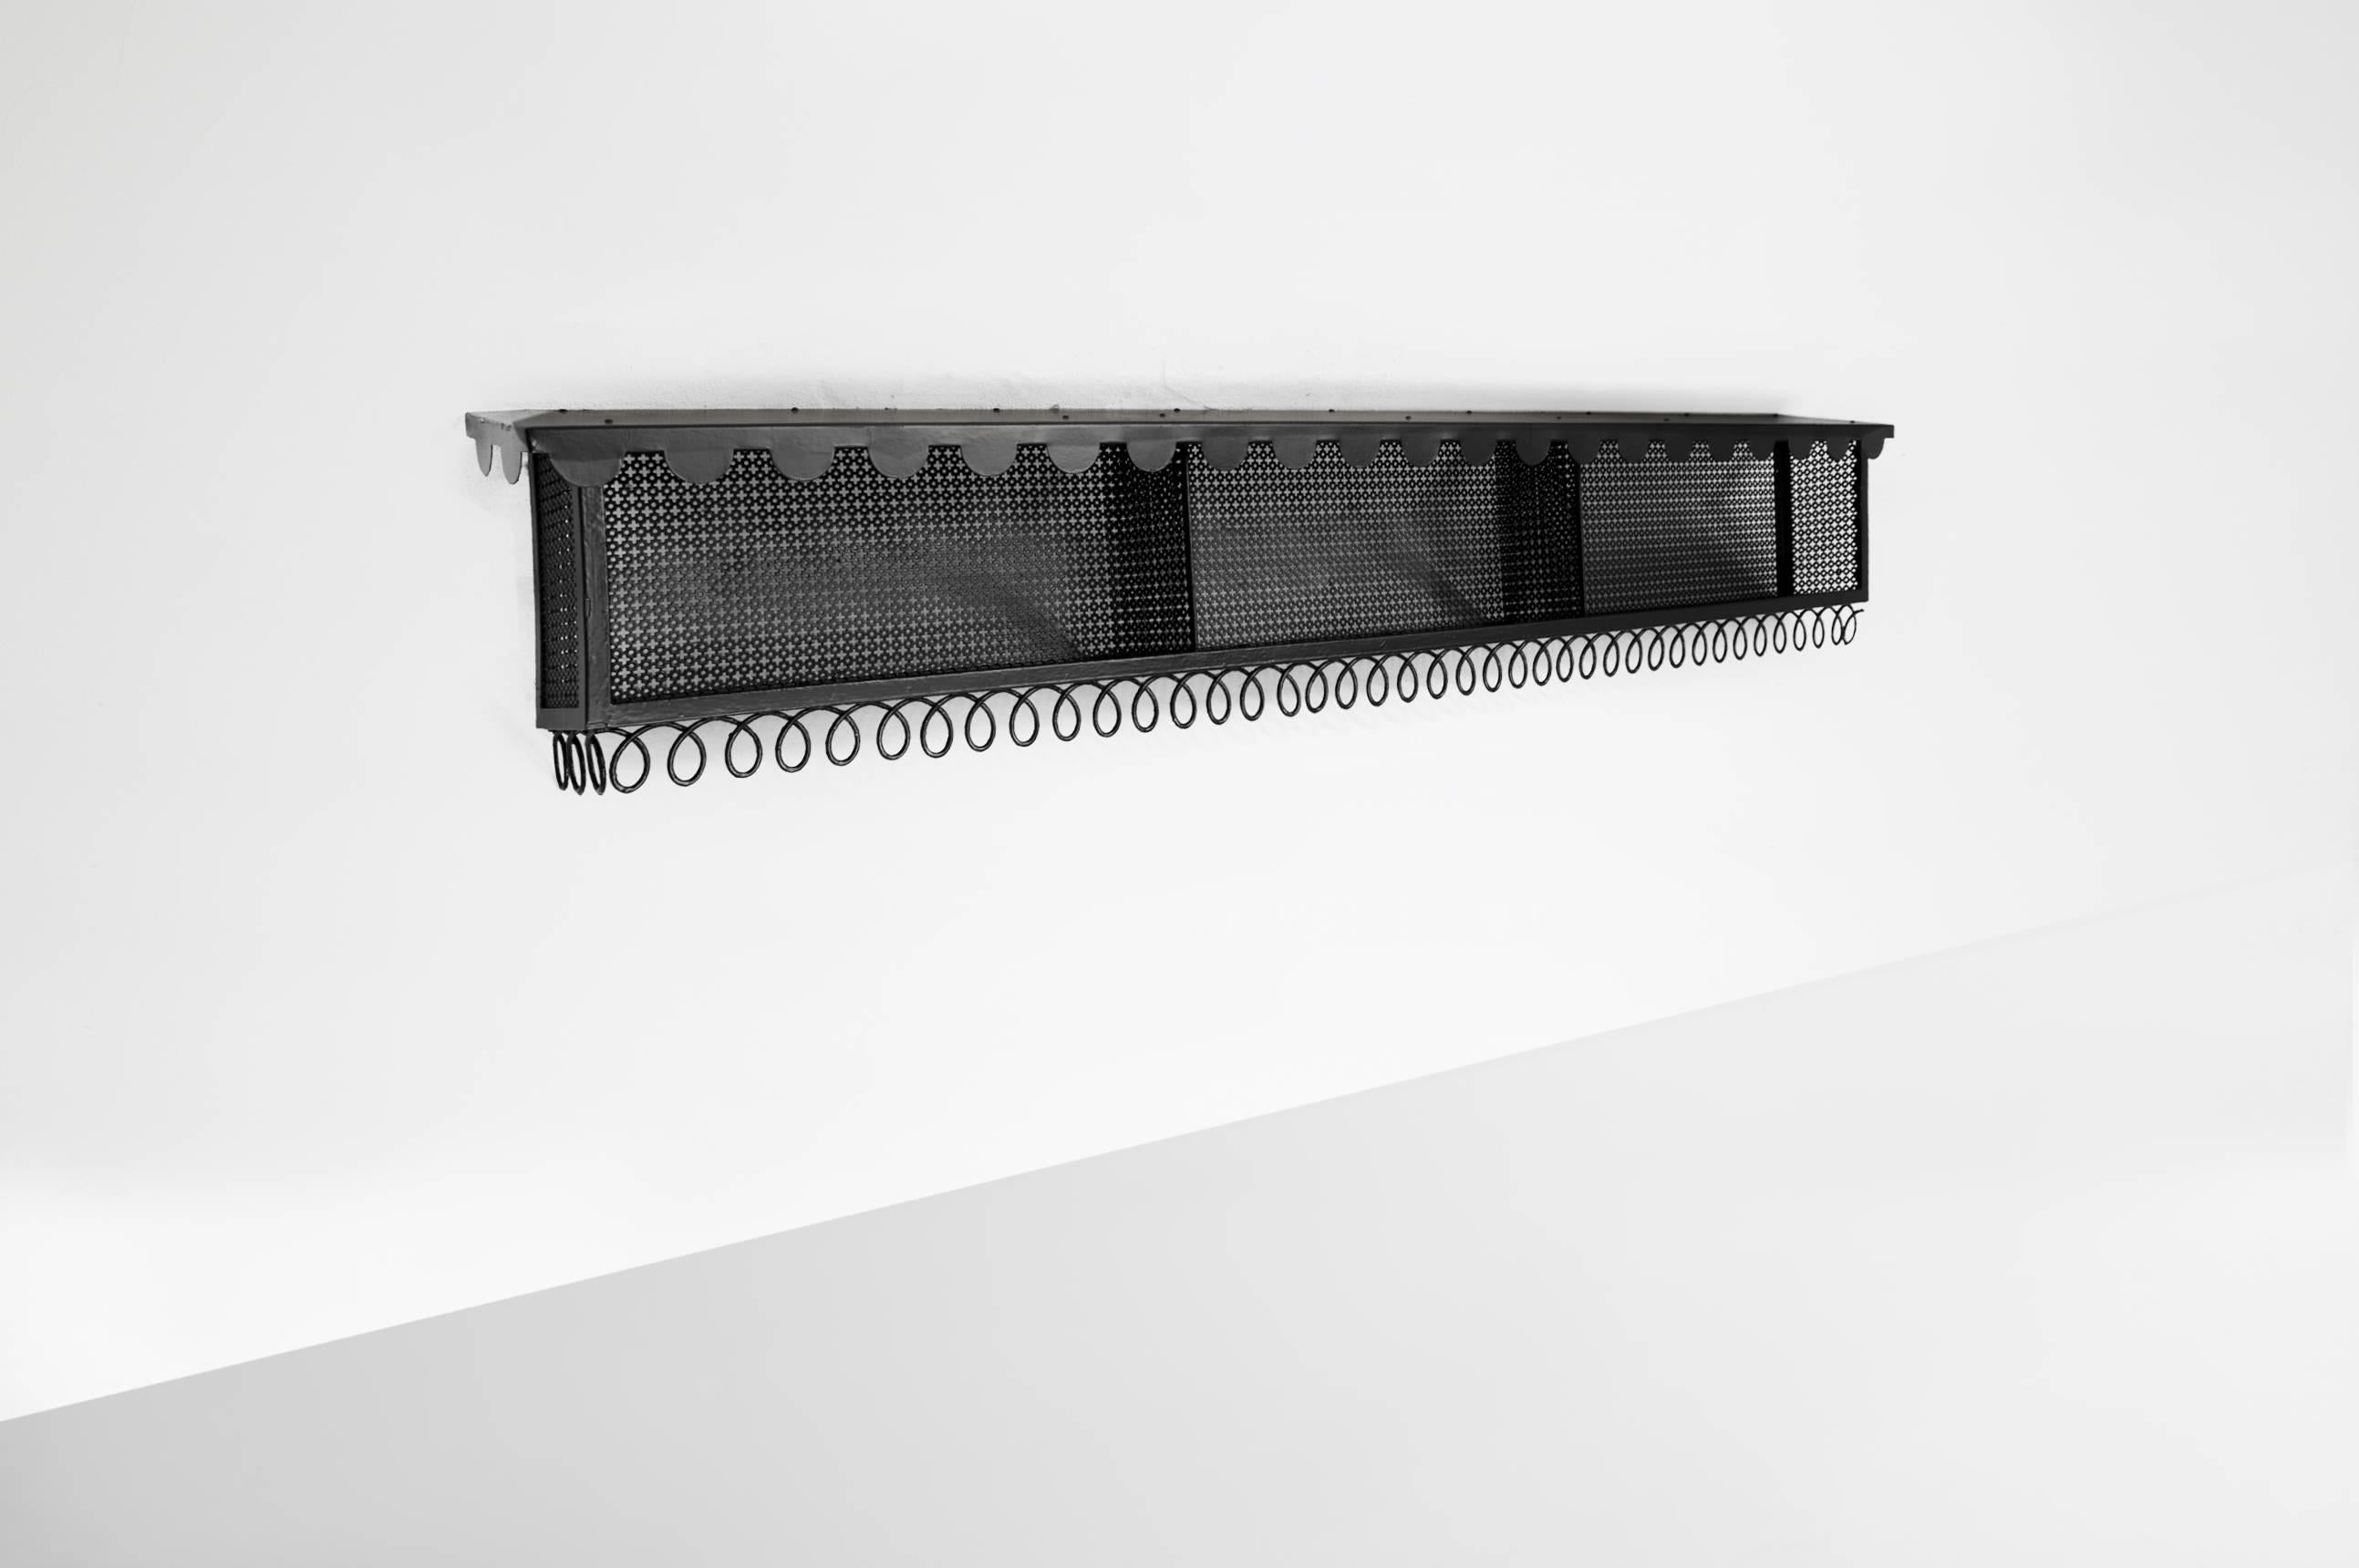 Mathieu Matégot (1910-2001).

Wall mounter bookshelf.
Manufactured by Atelier Mategot,
France, 1960.
Lacquered and perforated metal.

Measurements:
200 cm x 38 cm x 48 H cm.
78.74 in x 15 in x 19 H in.

Provenance:
A hair salon in Paris